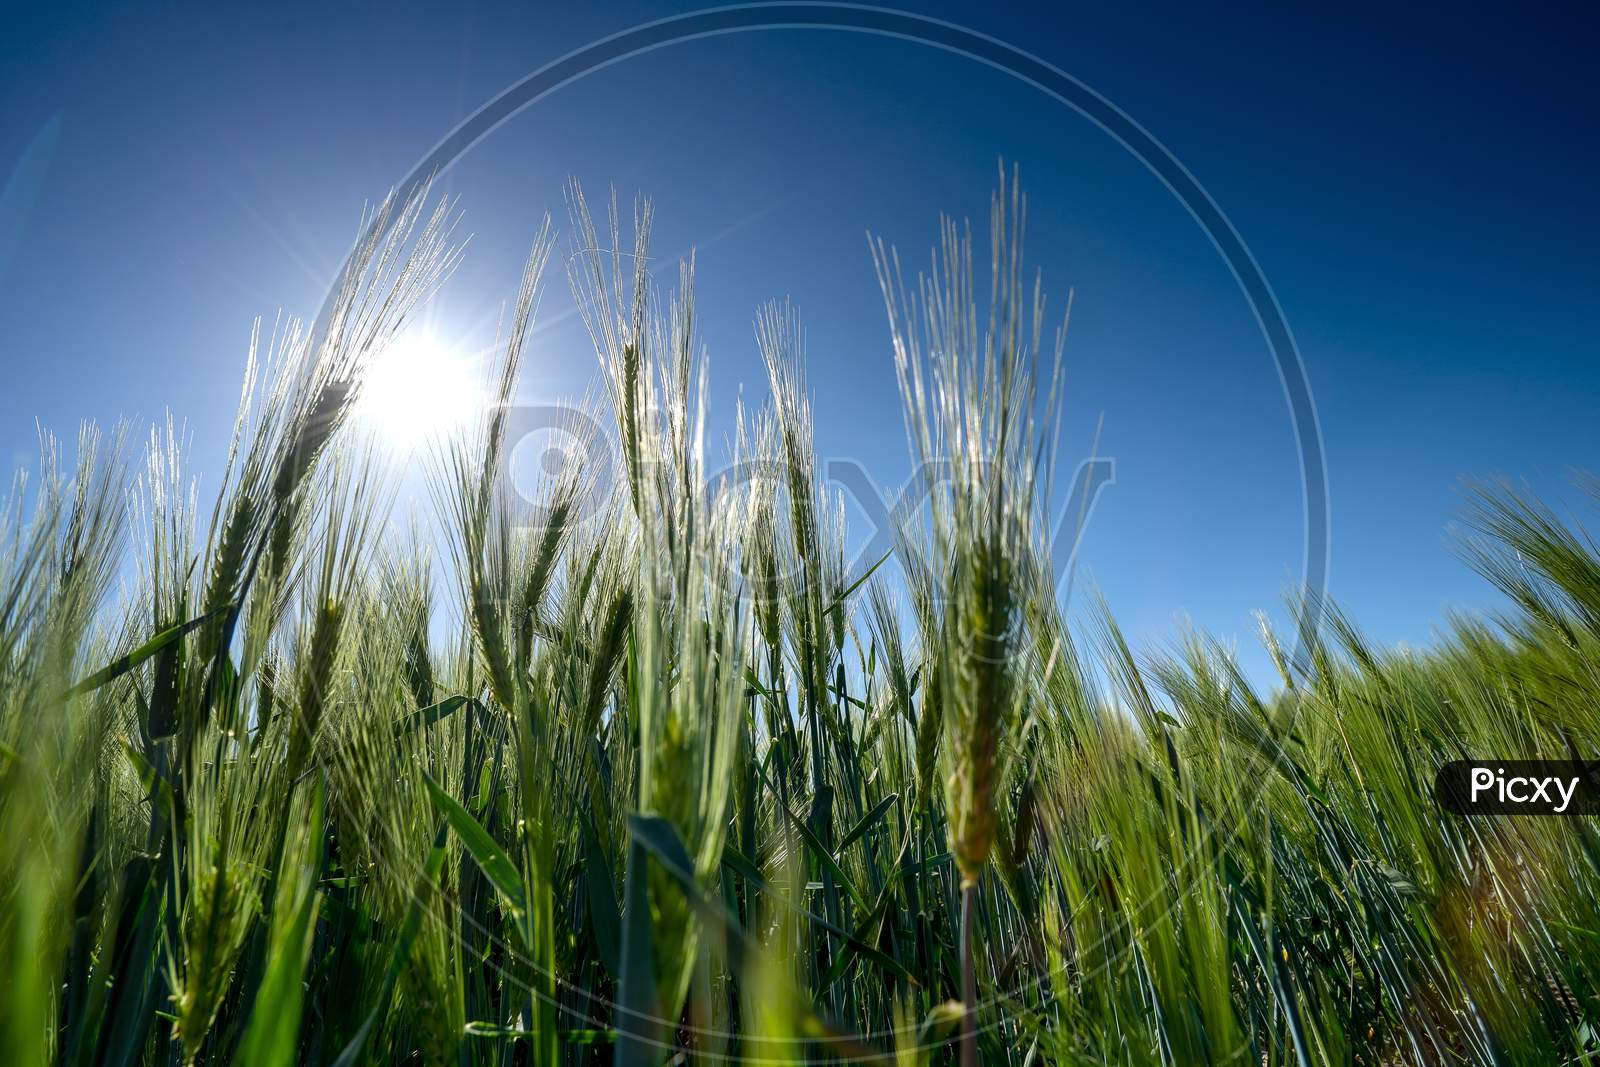 Barley With A Bright Blue Sky,Barley Grain Is Used For Flour, Barley Bread, Barley Beer, Some Whiskeys, Some Vodkas, And Animal Fodder